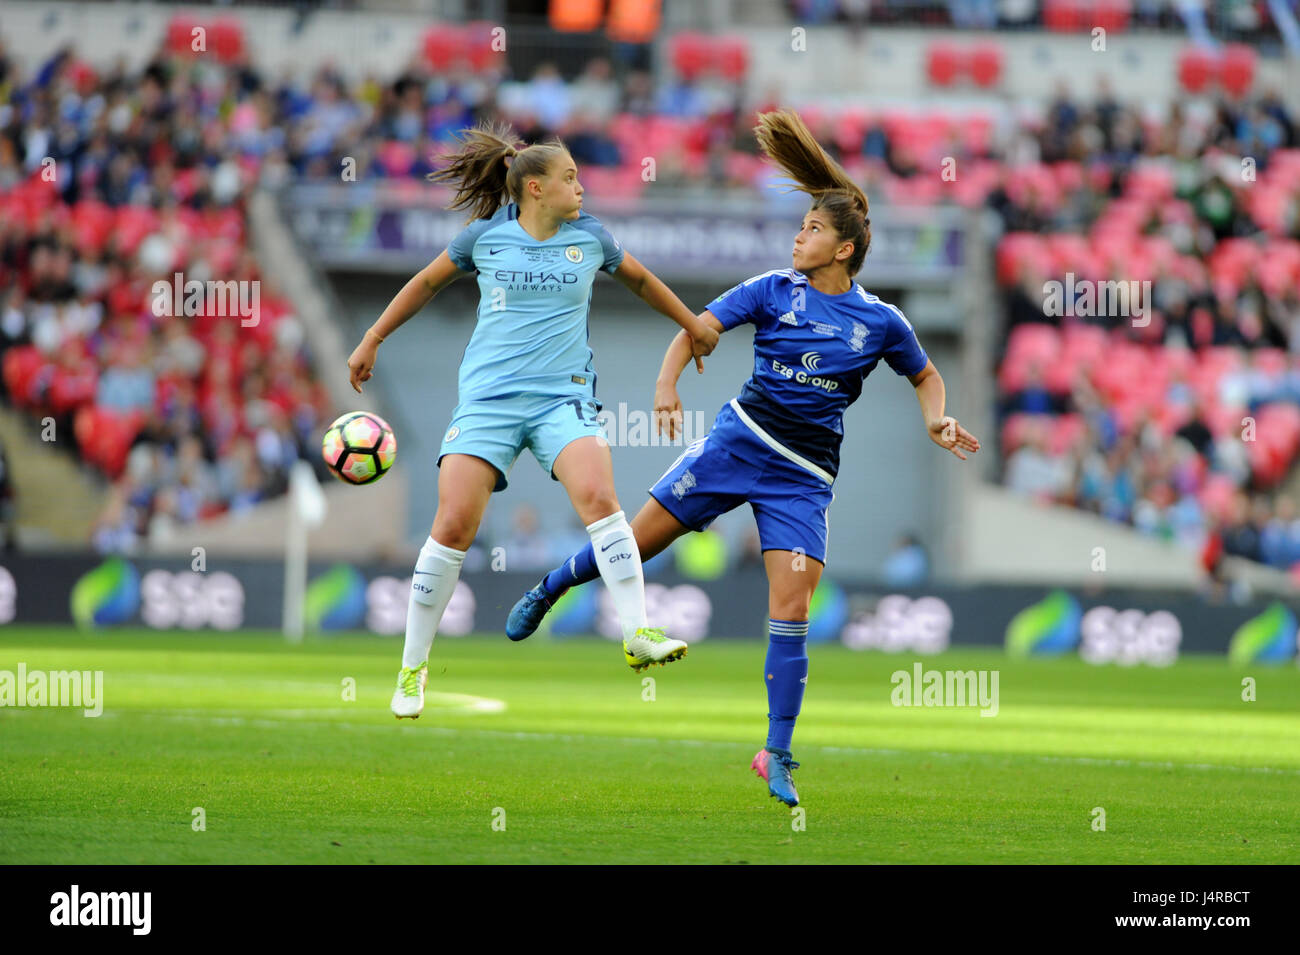 London, UK. May 13th 2017, Wembley Stadium, London, England; The SSE Womens FA Cup Final, Manchester City versus Birmingham City; Georgia Stanway (L) rises to challenge for the ball with Paige Williams (R) at Wembley Stadium. © David Partridge / Alamy Live News Stock Photo